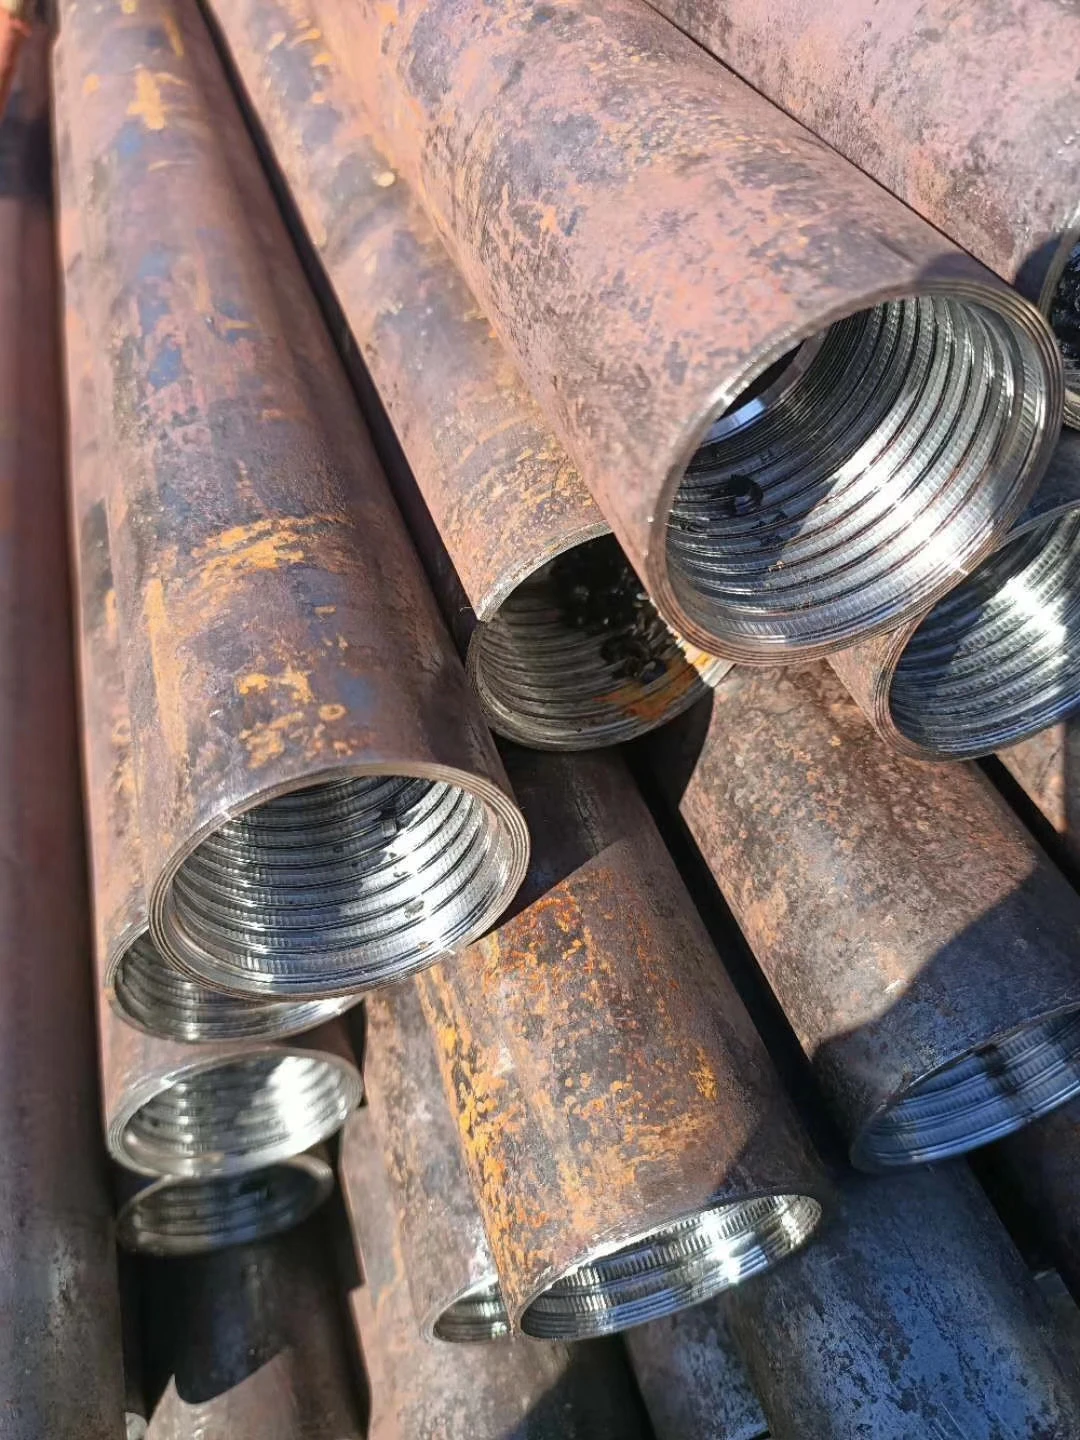 Steel pipe /cast iron pipe with internal and external thread at both ends